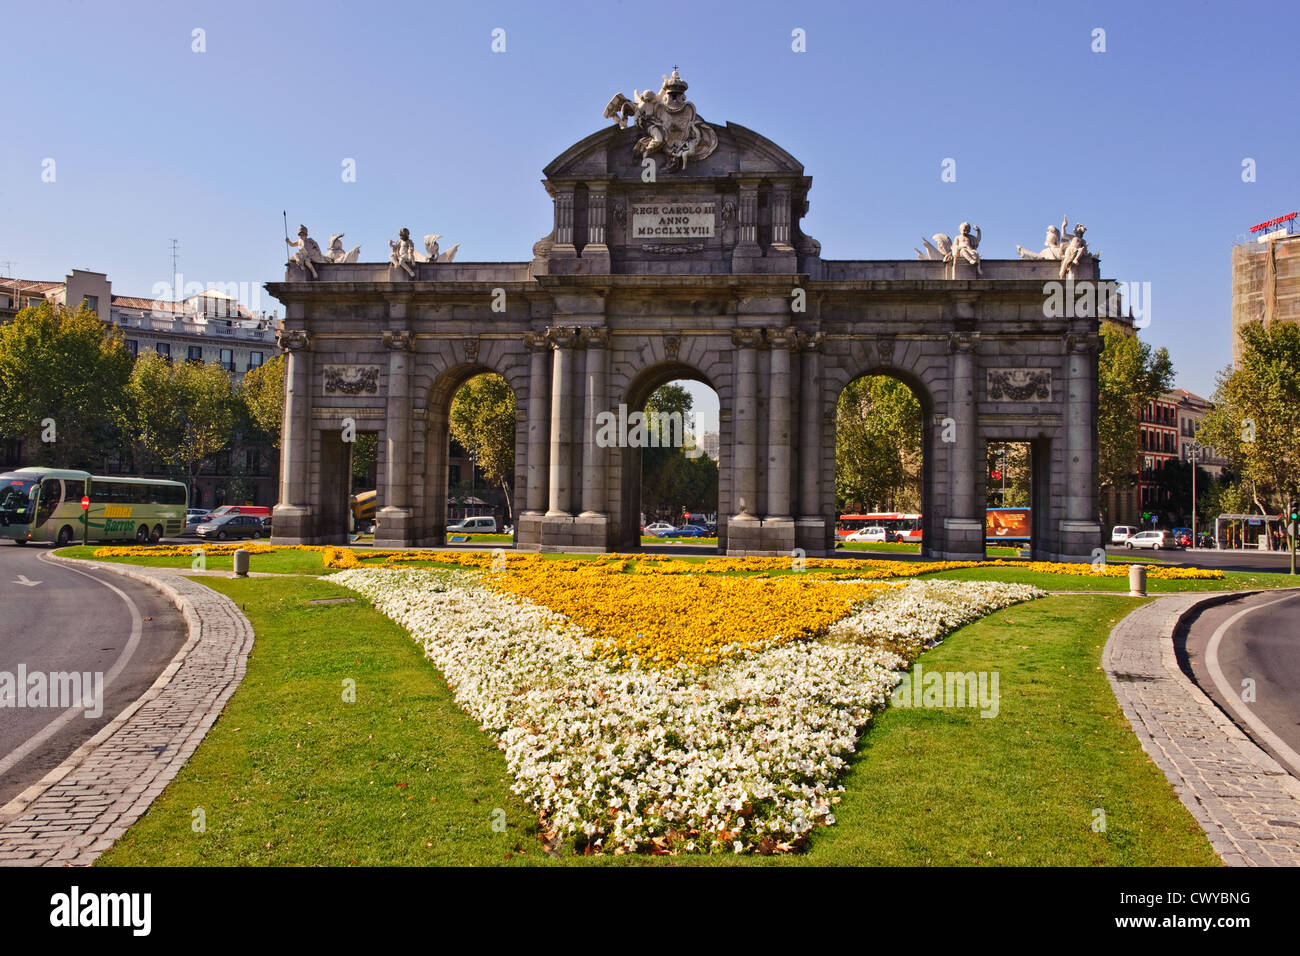 Puerta de Alcalá (Alcalá Gate) is a monument in the Plaza de la Independencia (Independence Square) in Madrid, Spain Stock Photo